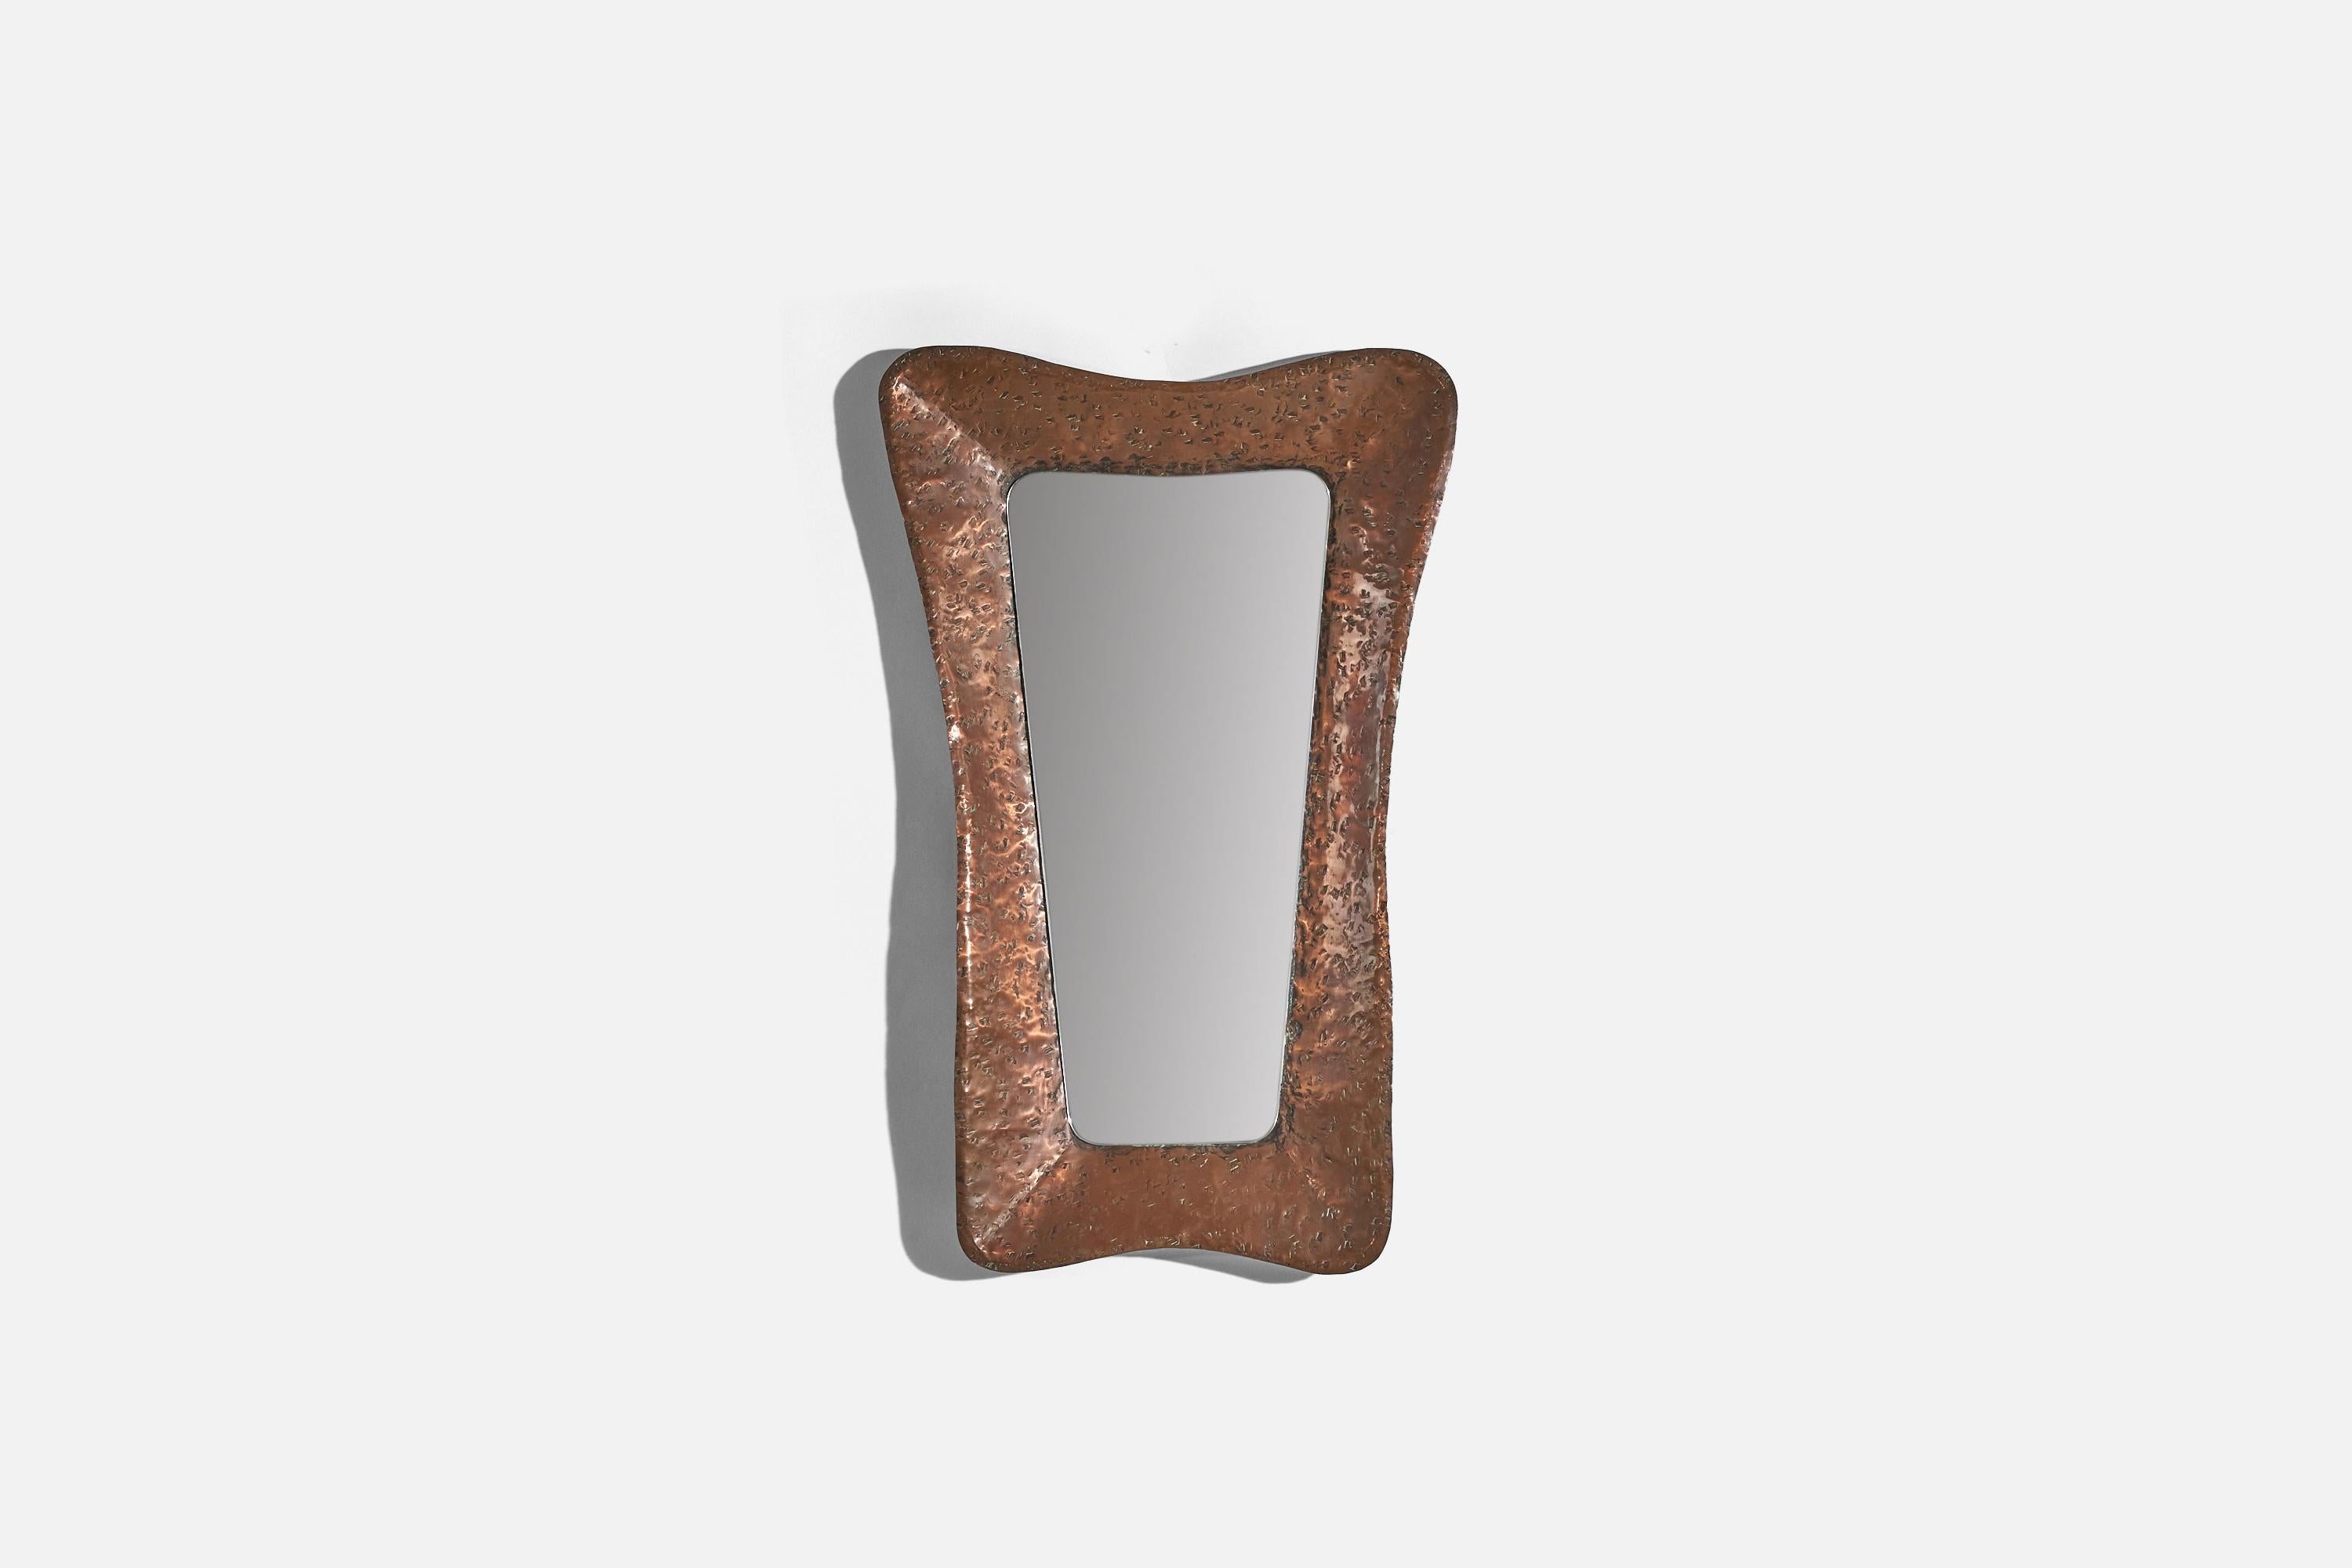 A bronze wall mirror designed and produced in Italy, c. 1950s.
 